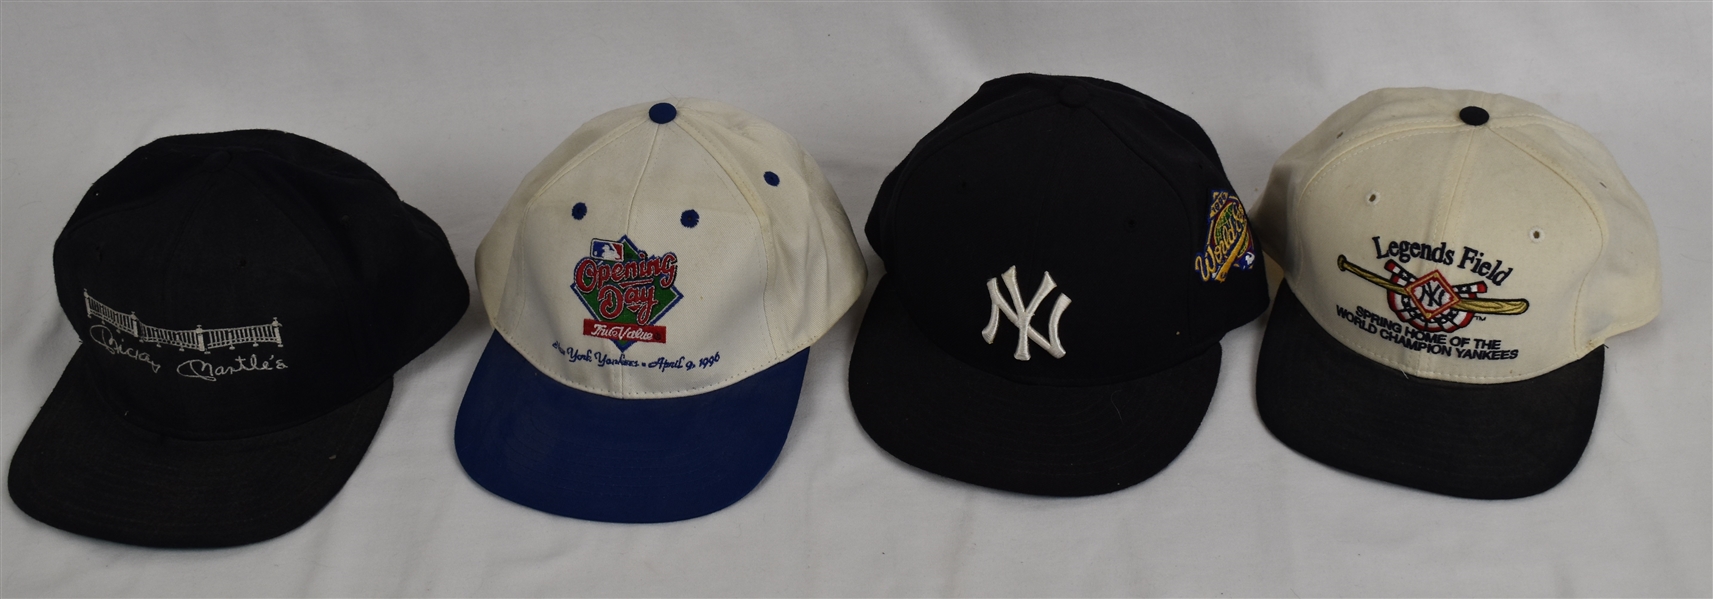 New York Yankee Collection of 4 Hats w/Mickey Mantle